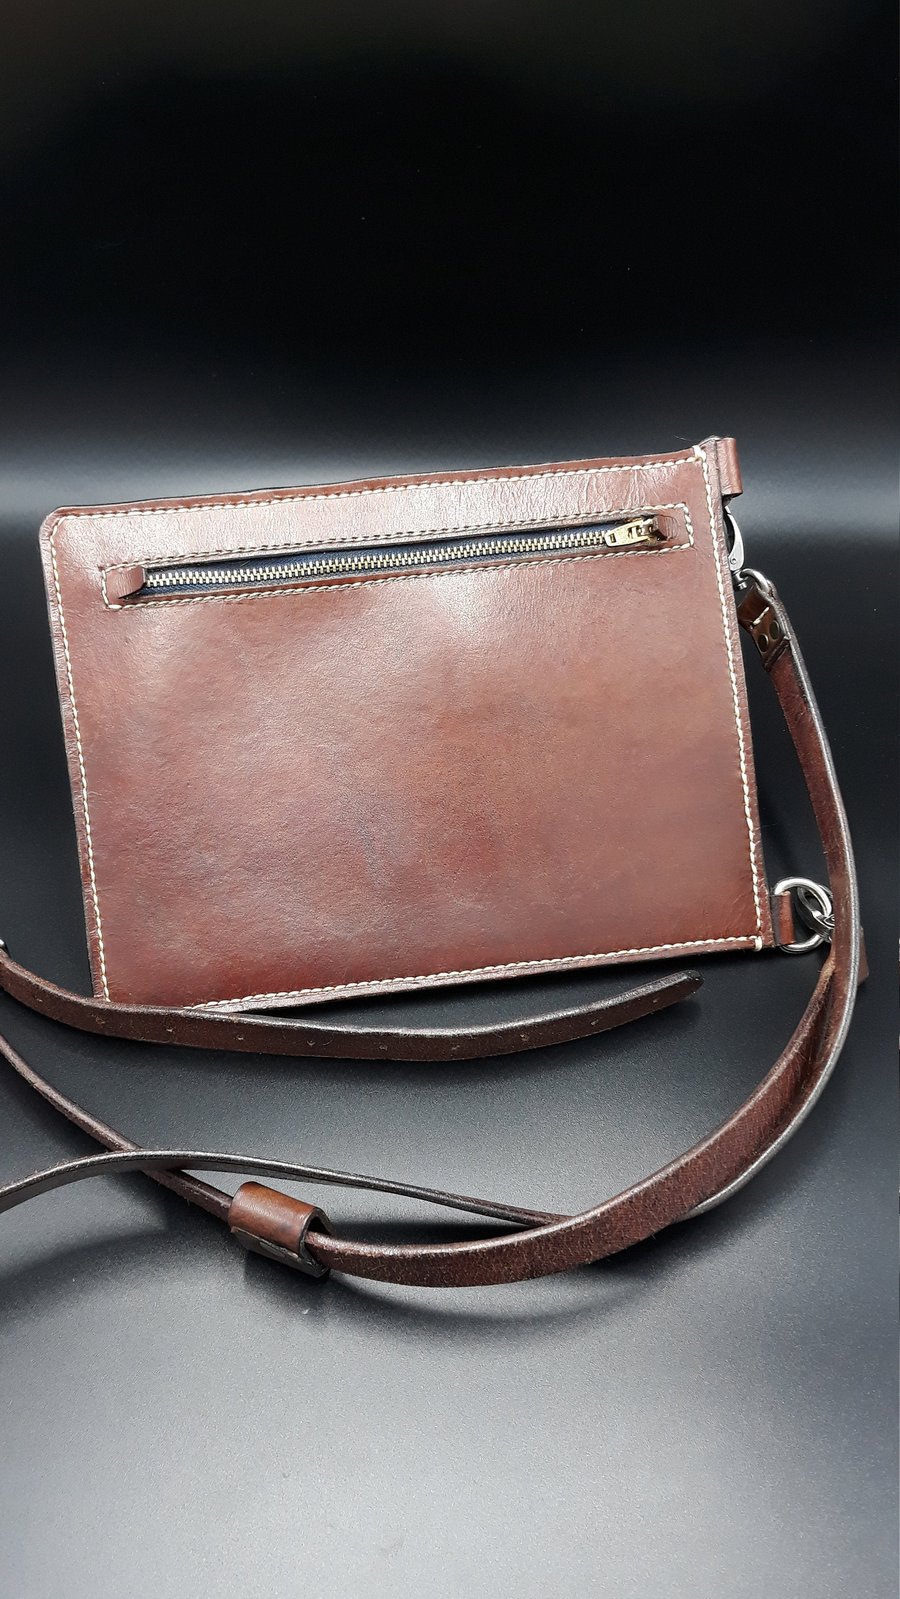 Handmade Leather Travel Security Pouch.